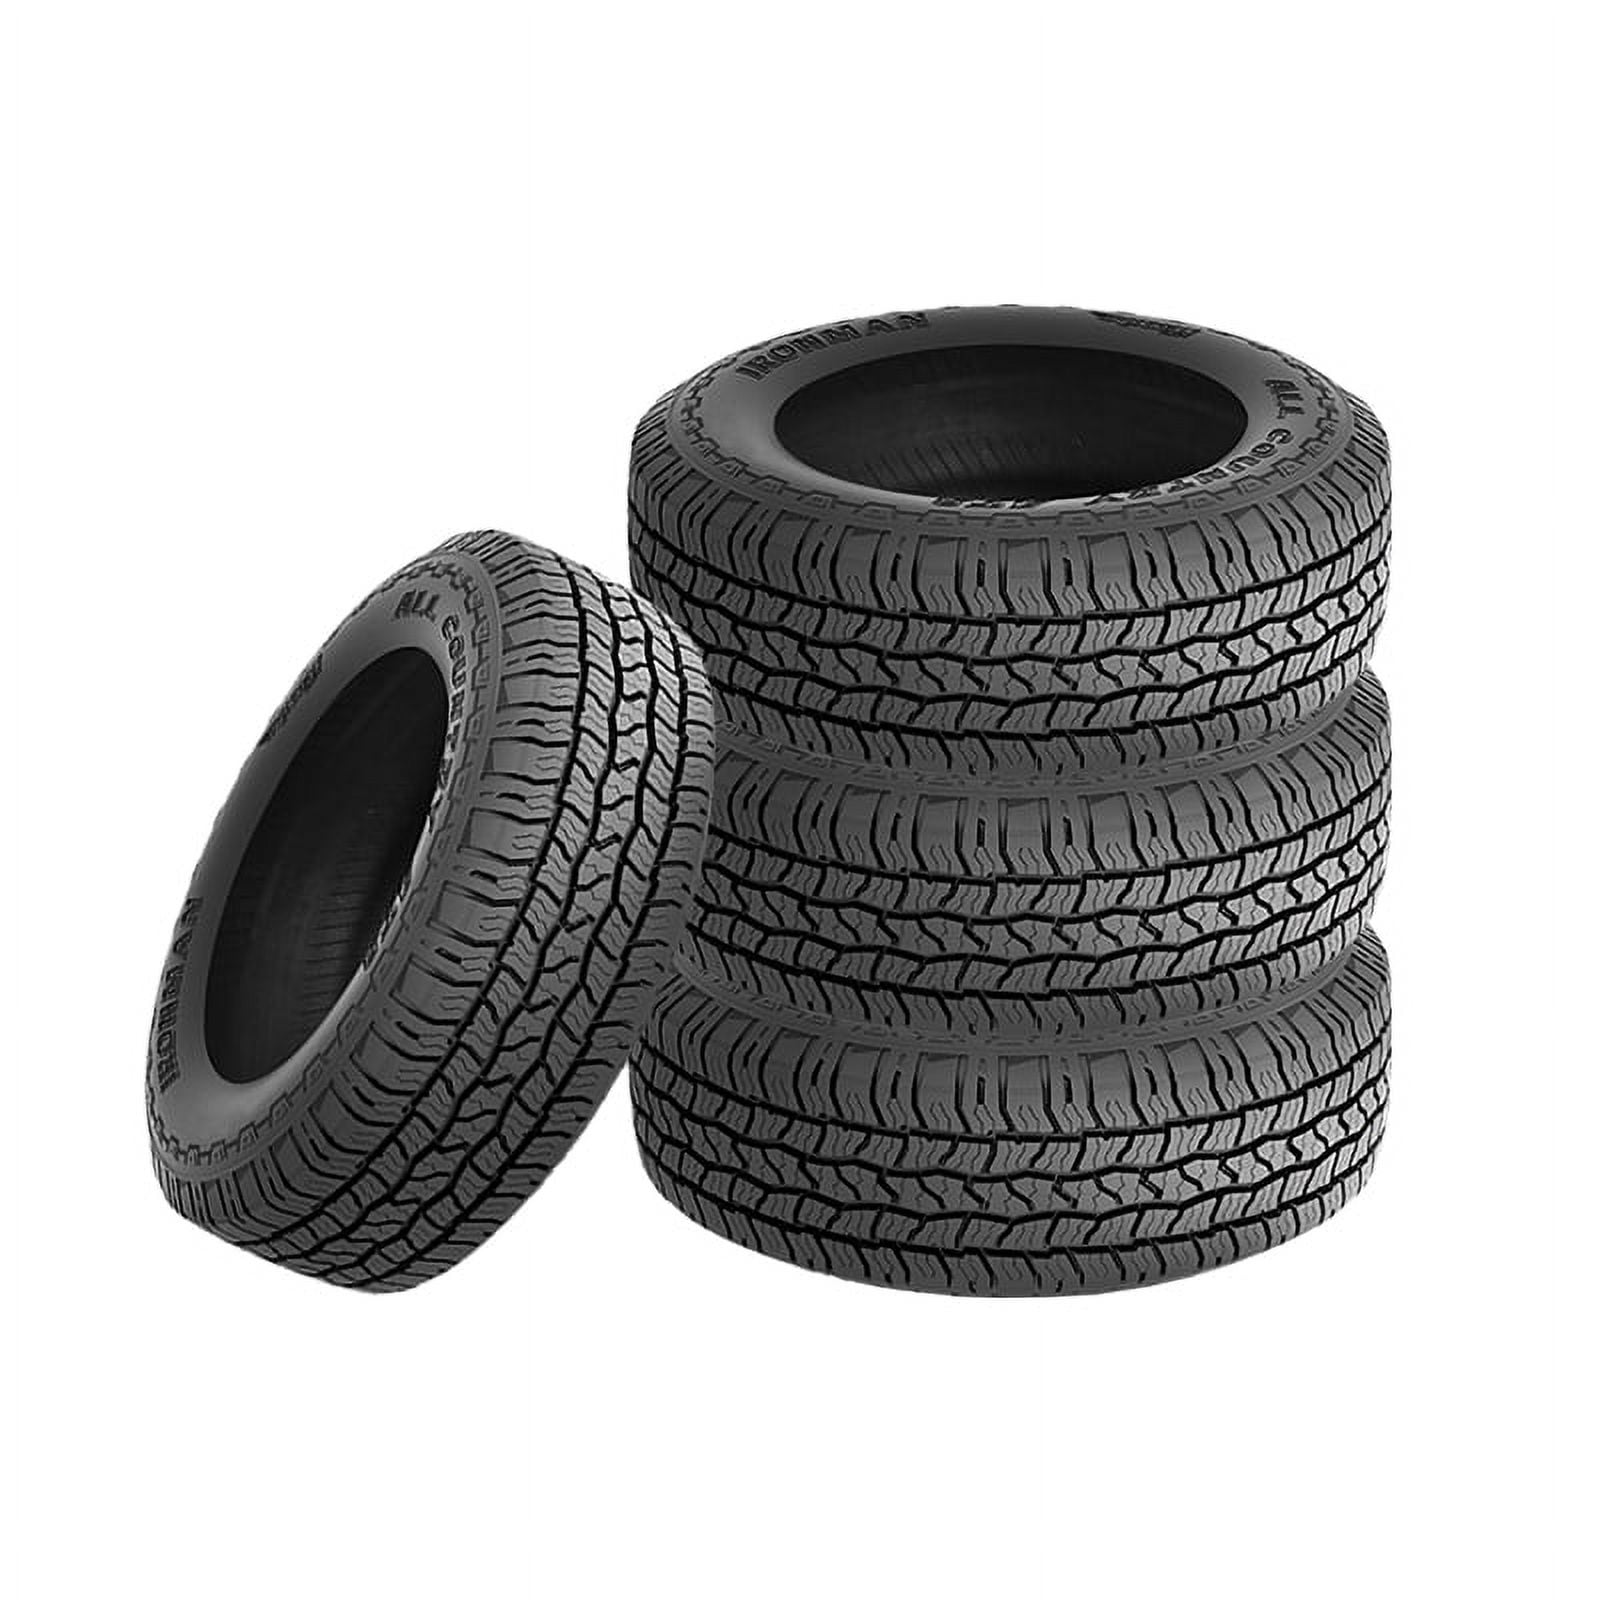 IRONMAN ALL COUNTRY AT2 LT285/70R17 121/118S E BW ALL SEASON TIRE